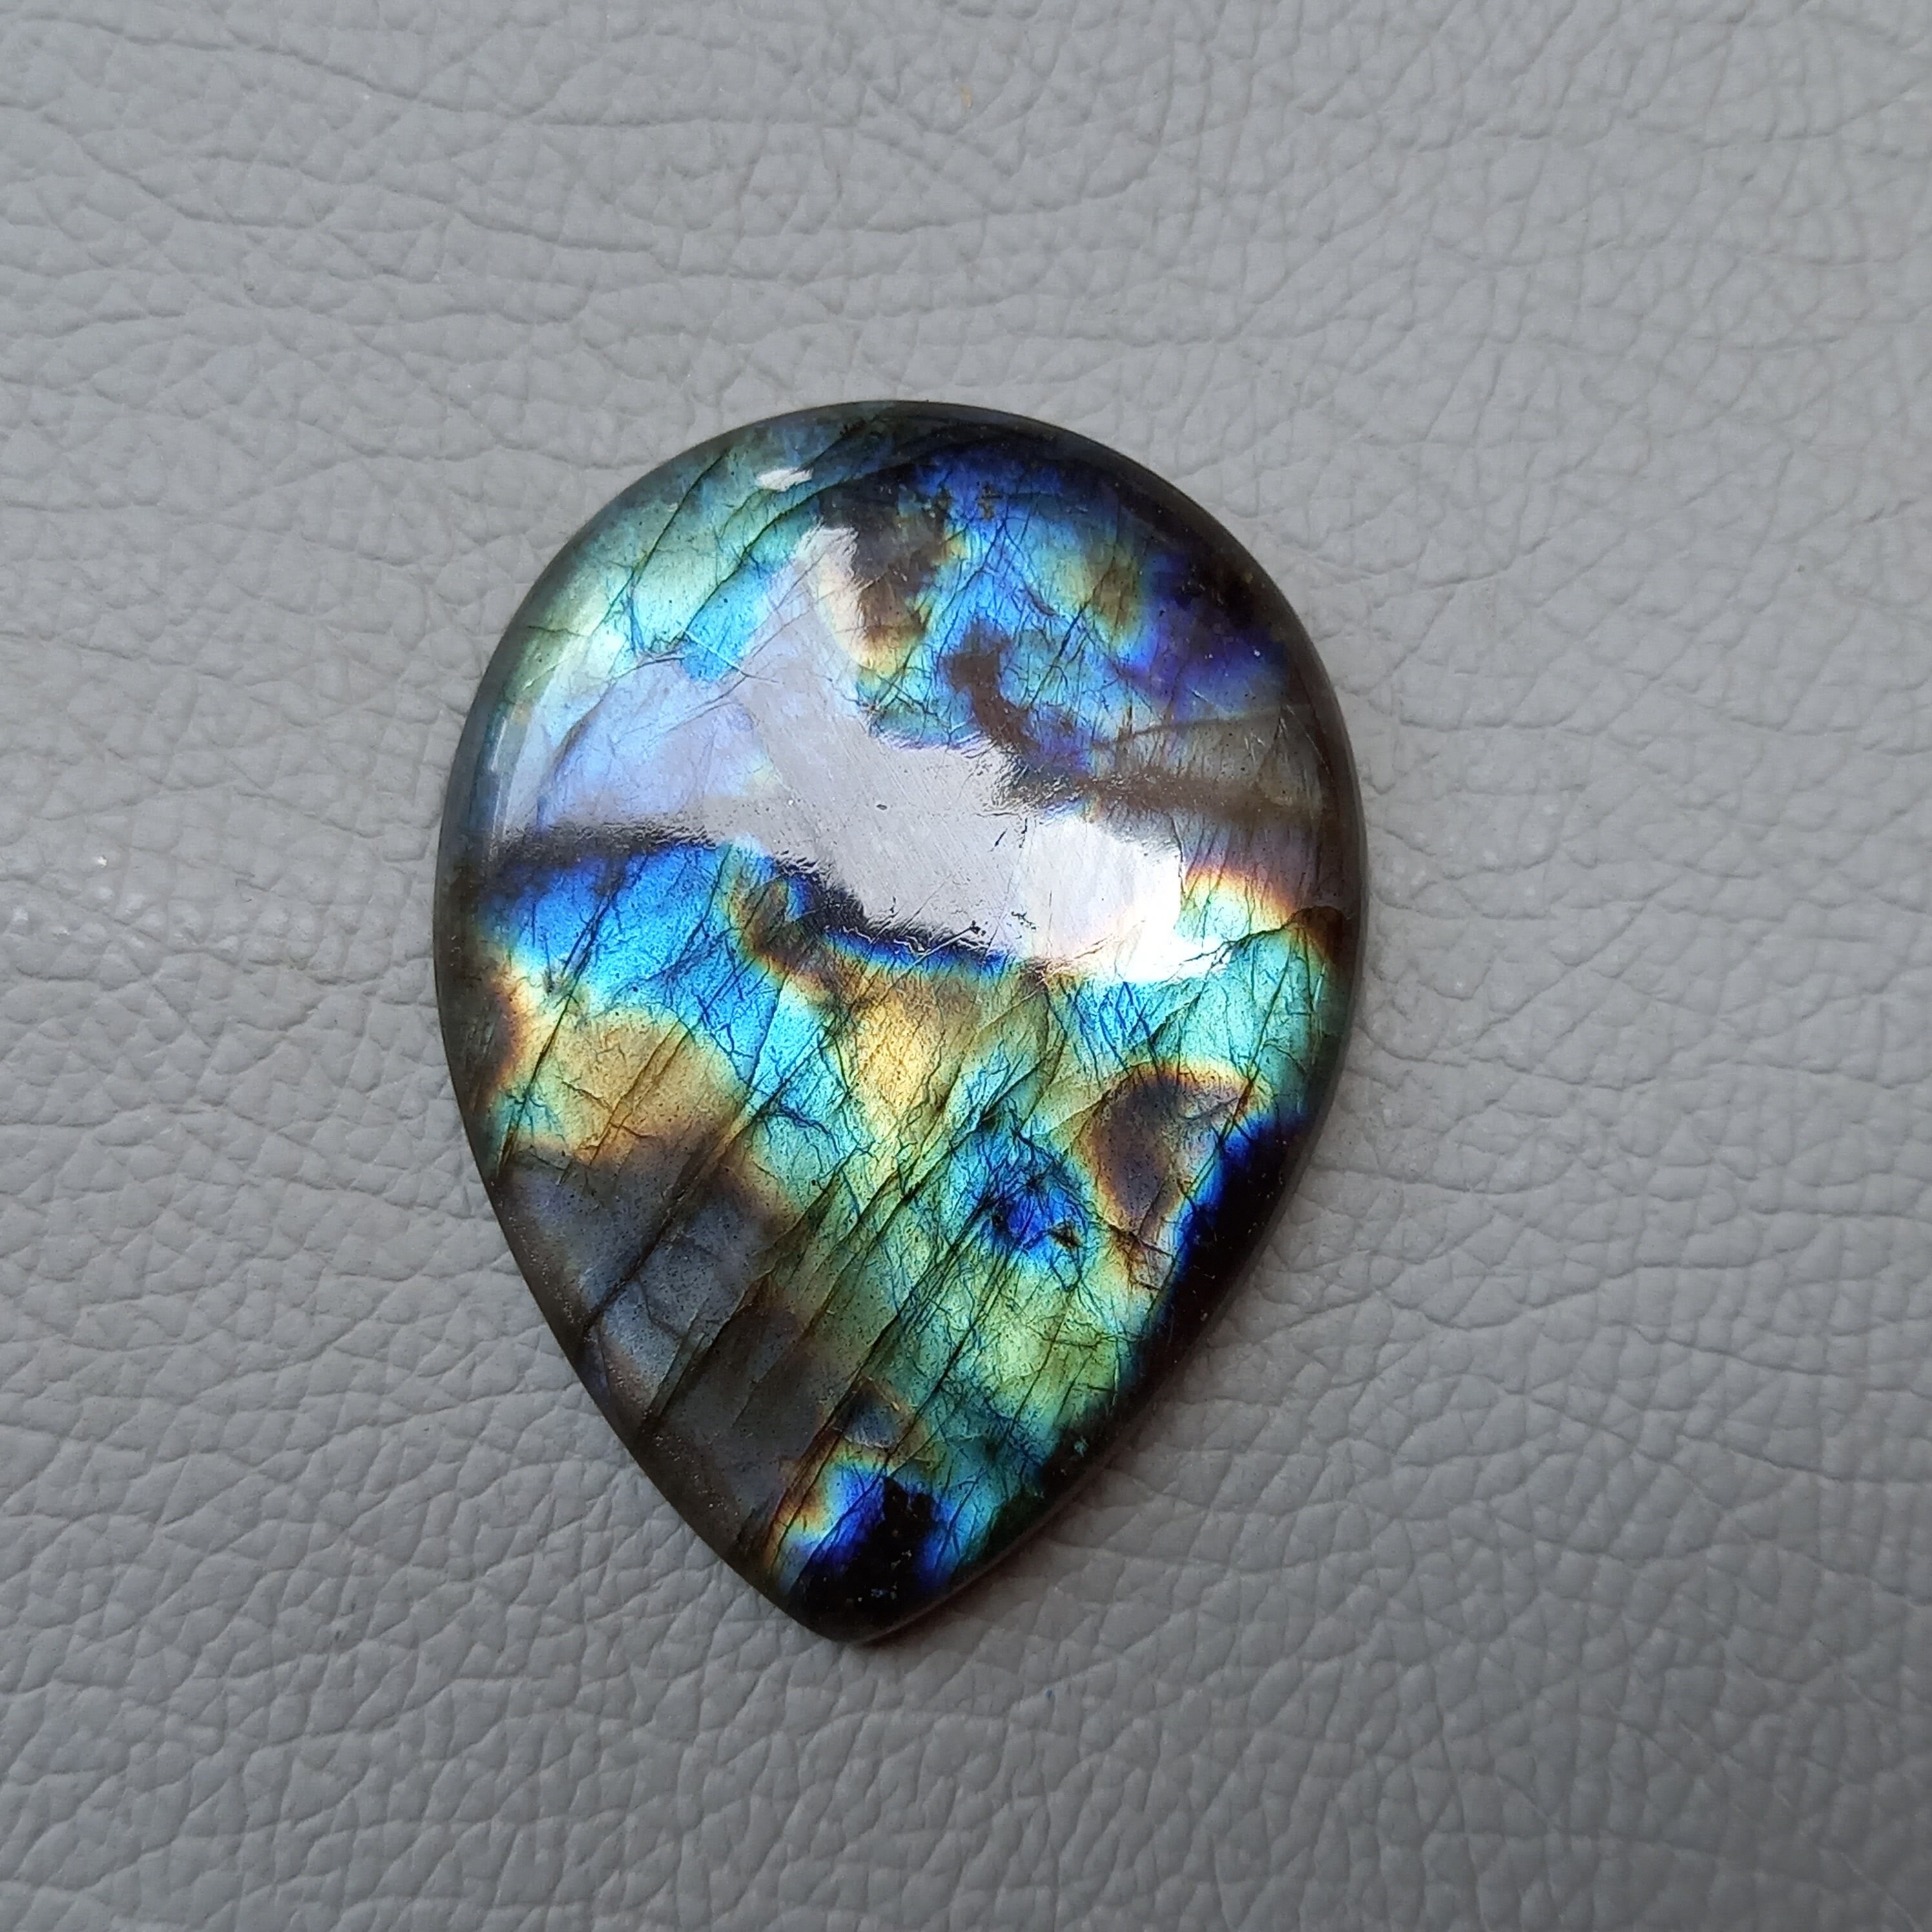 Details about   Natural Multi Fire Matched Pair Labradorite Mix Cabochon Loose Gemstone #227 